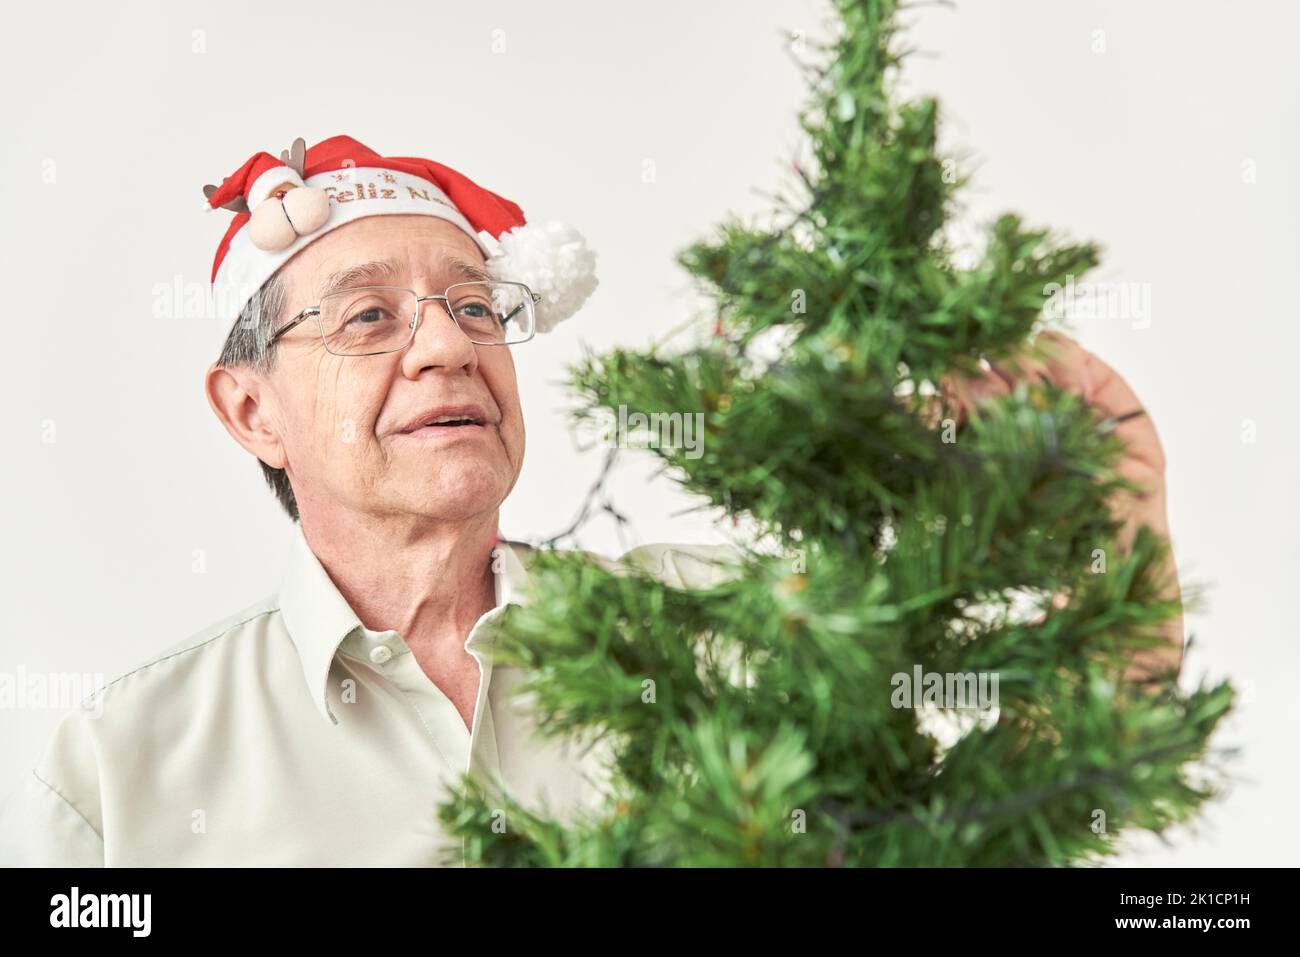 Happy senior hispanic man smiling while decorating a Christmas tree at home wearing a red Santa Claus hat with the text Merry Christmas. The happiness Stock Photo